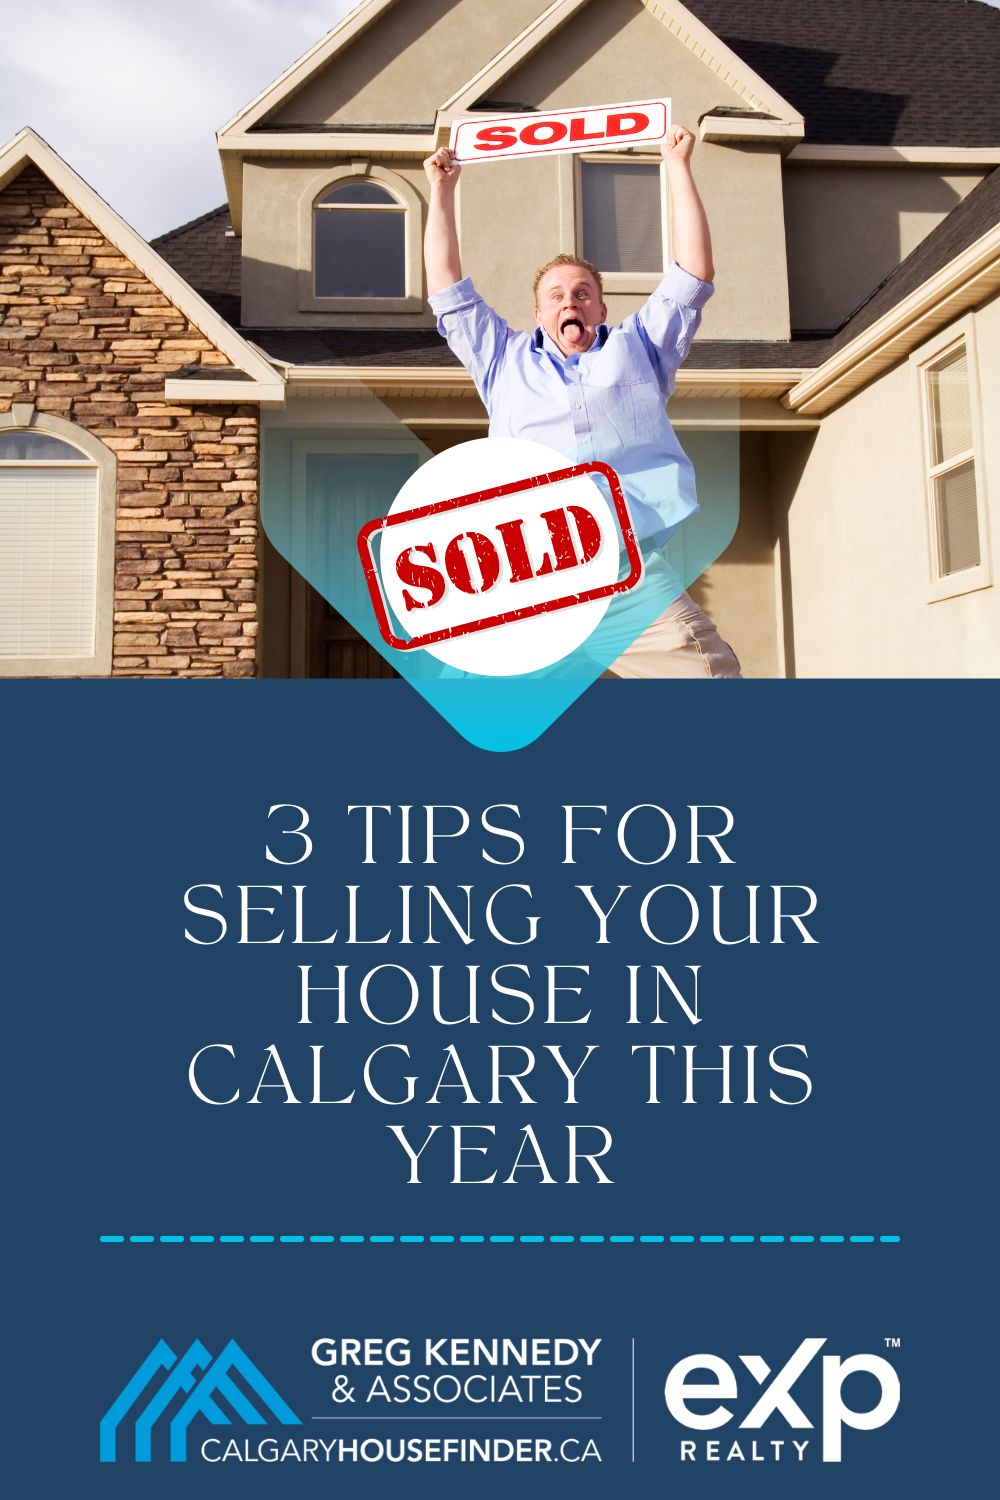 3 Tips for Selling Your House in Calgary this Year